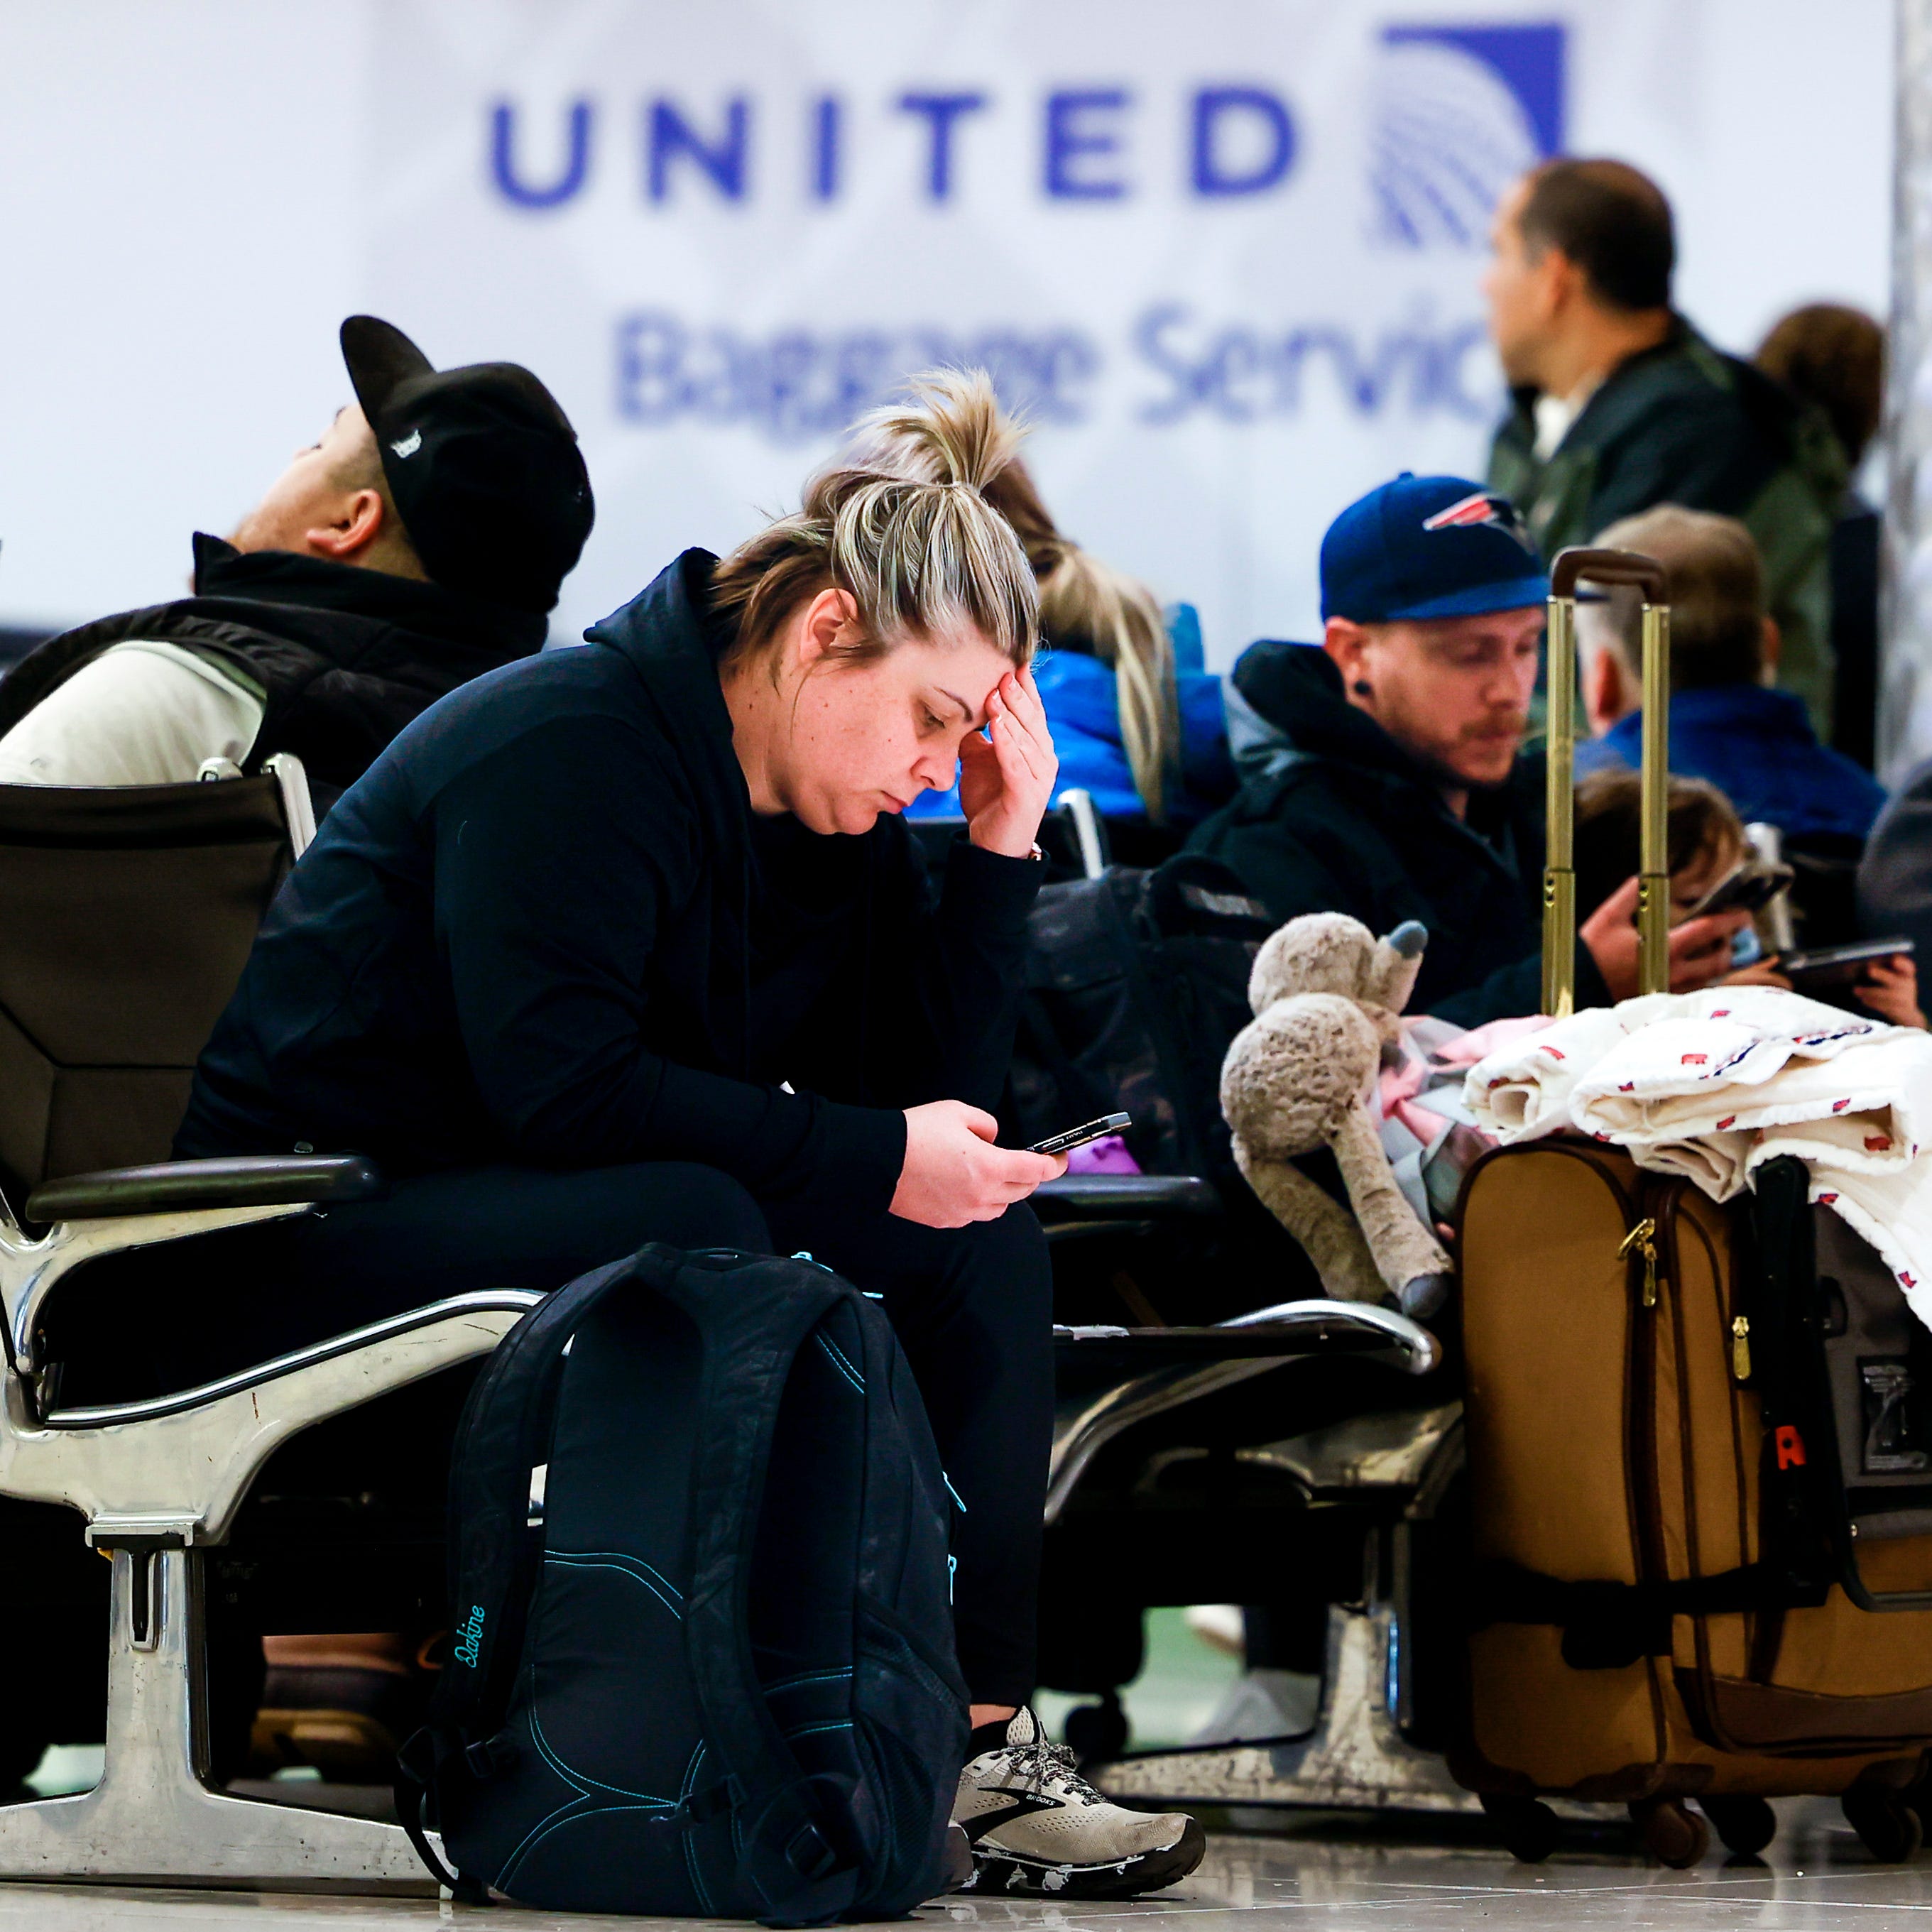 Mairi Risner sits at Denver International Airport after her flight was canceled due to a winter storm on February 22, 2023.